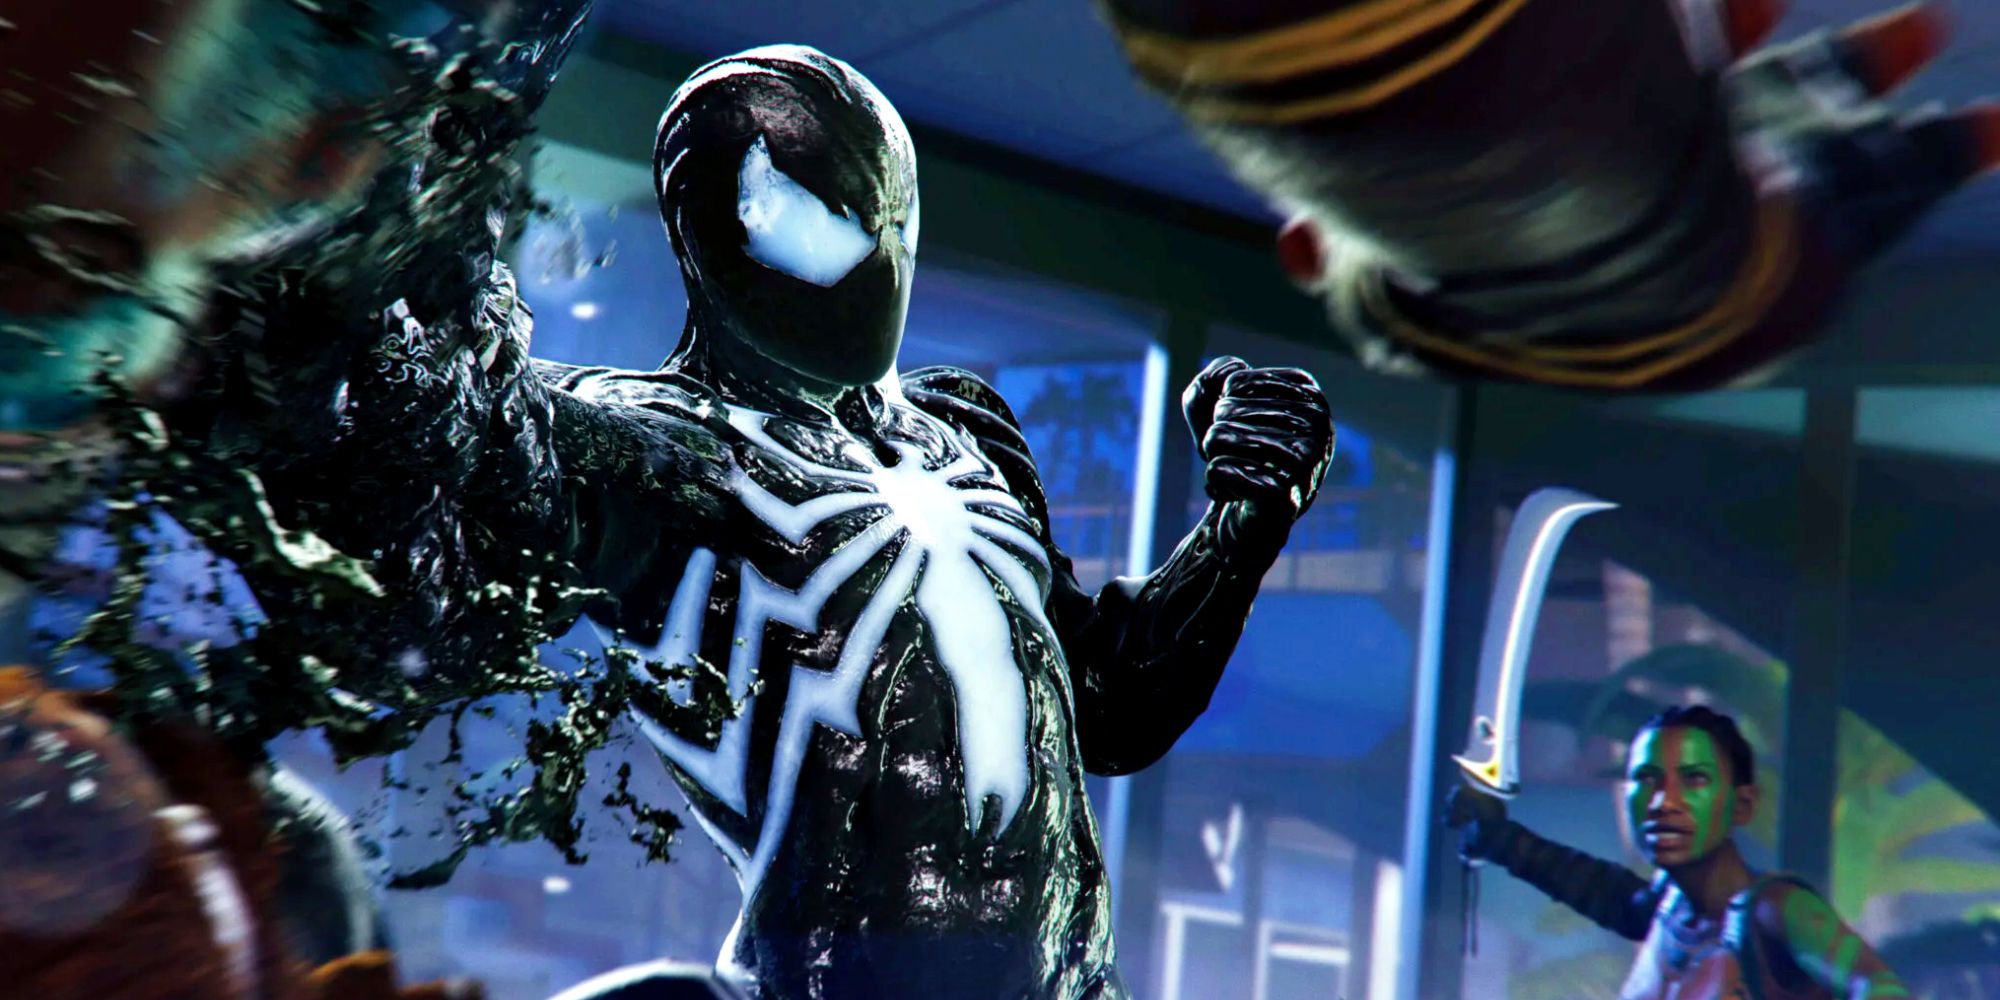 Peter Parker in the black and white symbiote suit punching an enemy. In the background is another foe running toward Spider-Man with a sword drawn.